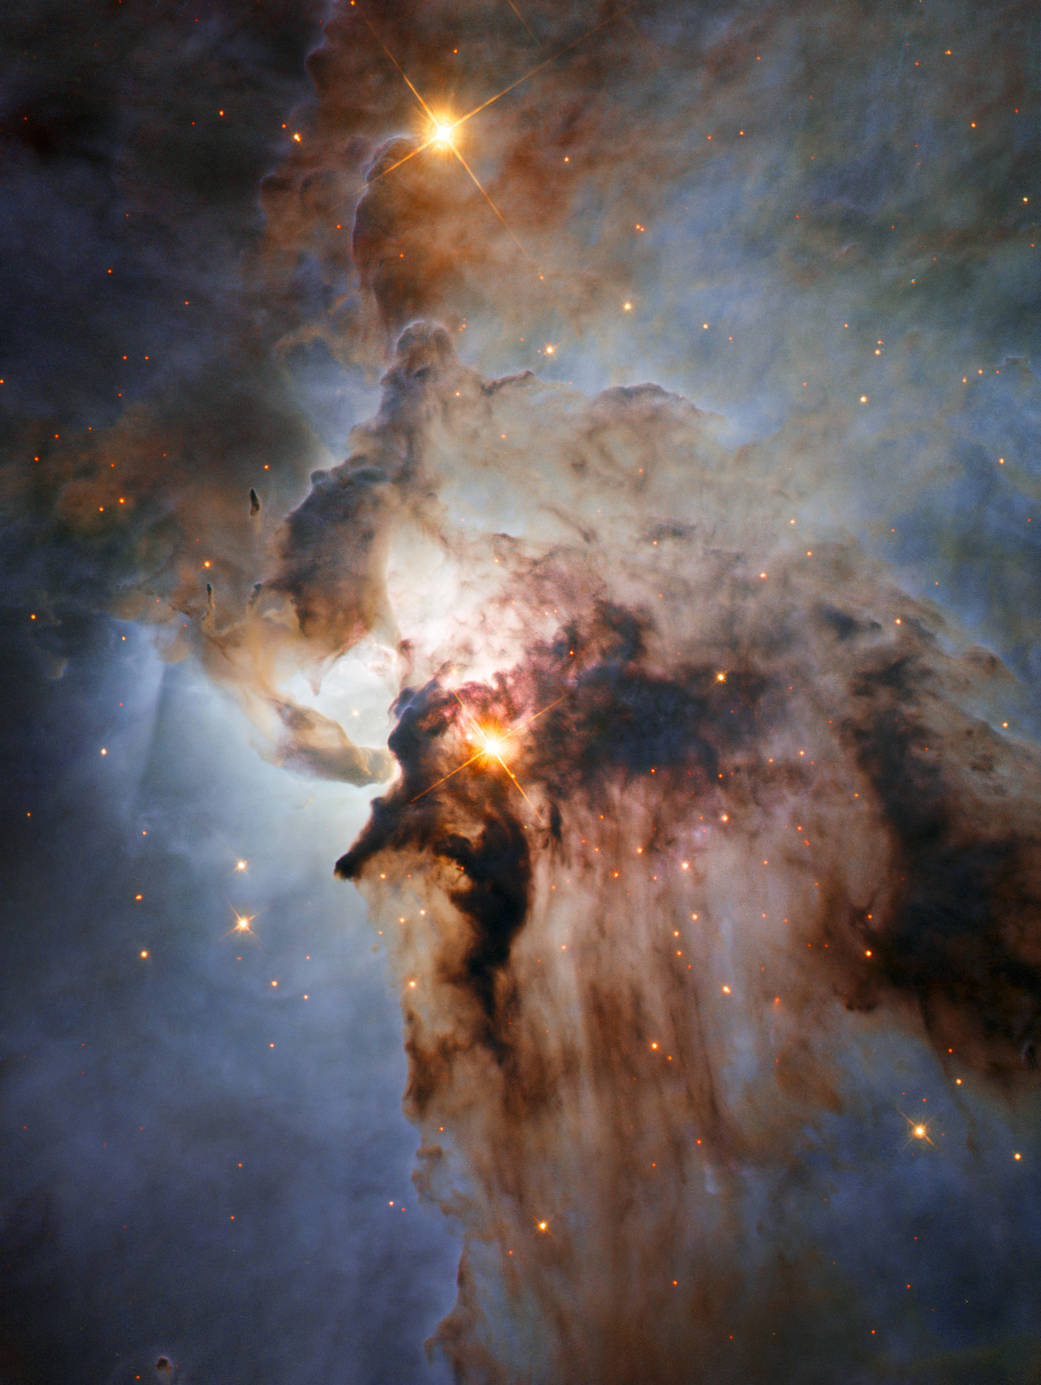 Bright nebula with dark clouds of gas extending from center